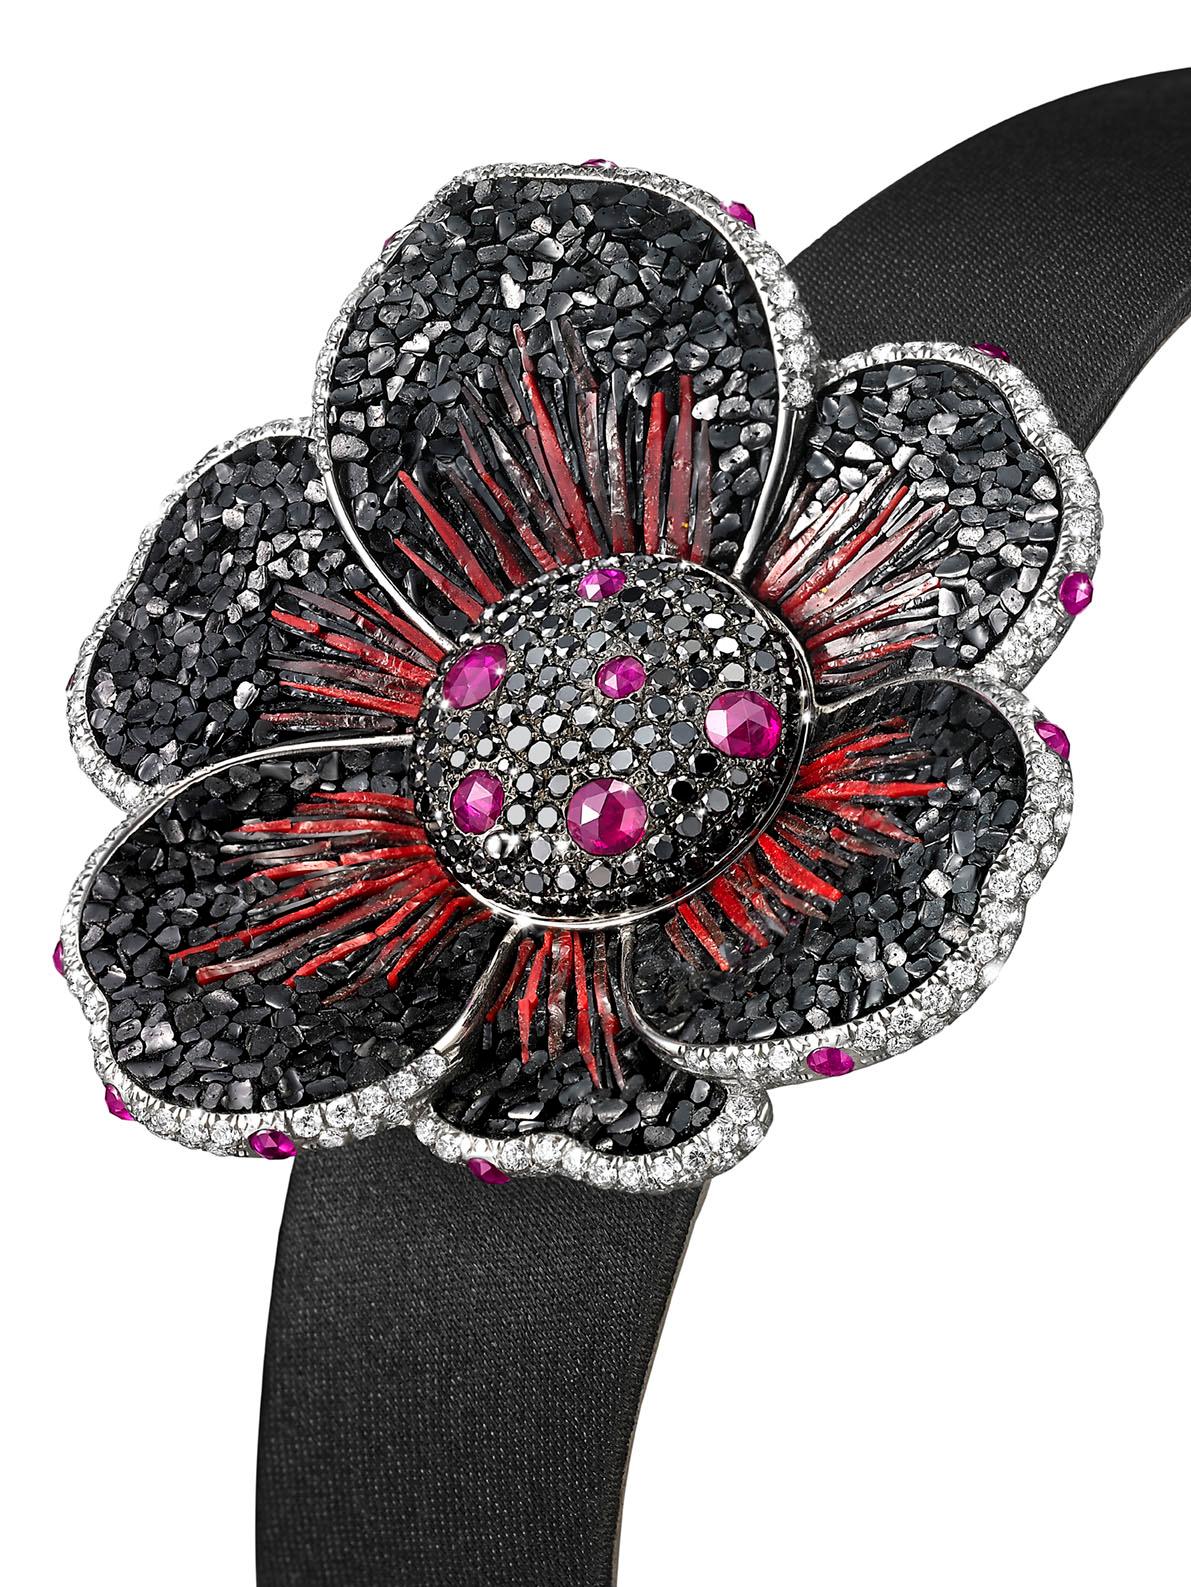 Brilliant Cut Watch Gold White and Black Diamonds Ruby Satin Strap Hand Decorated Micromosaic For Sale